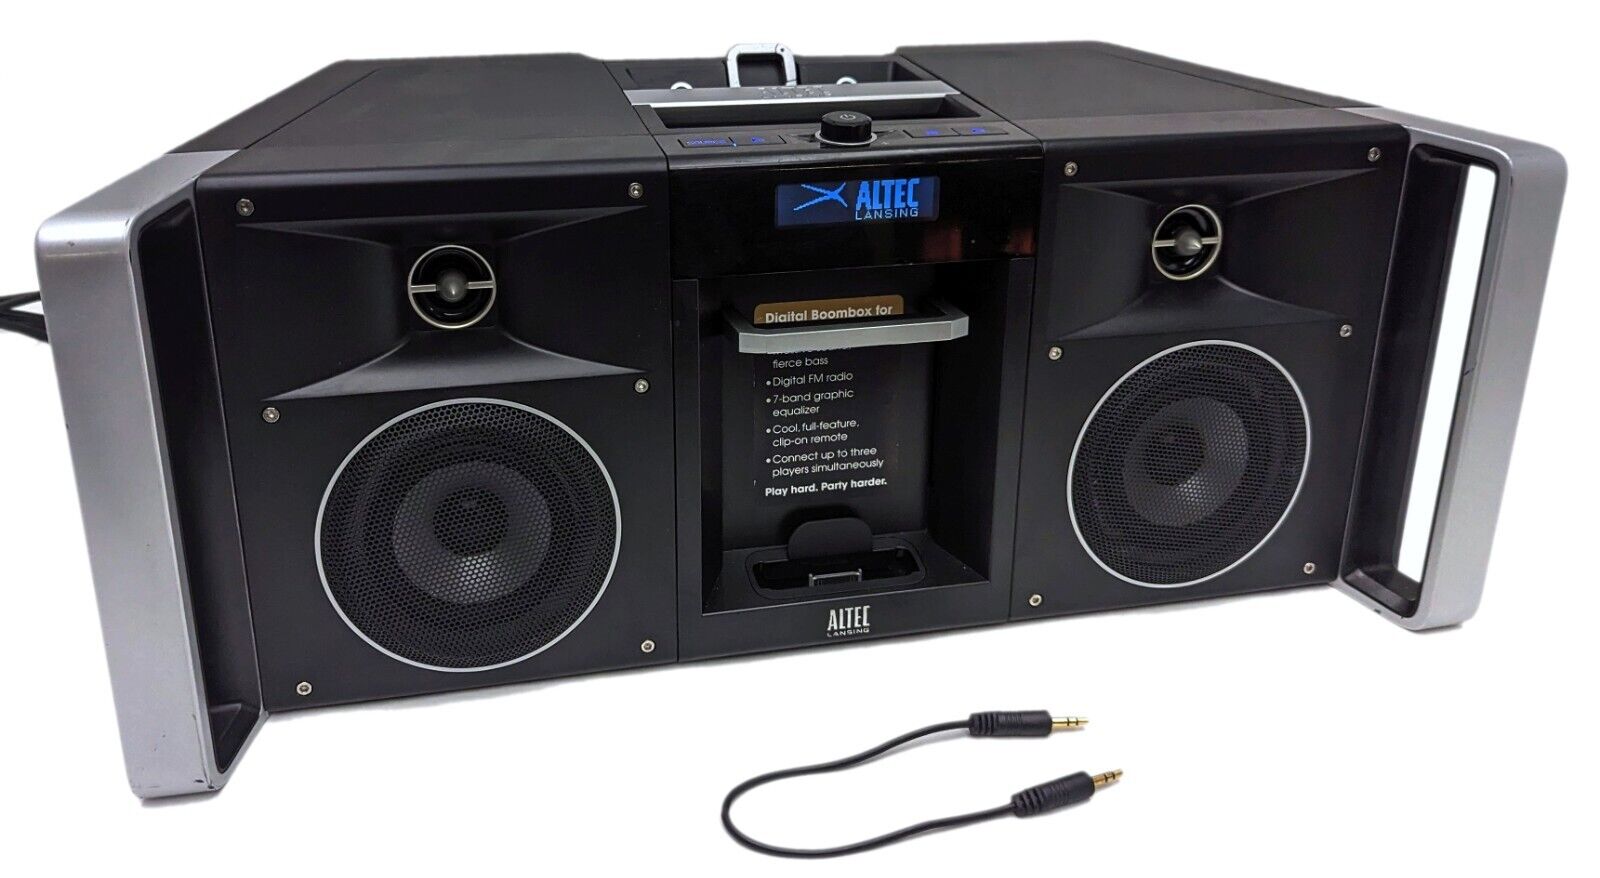 Altec Lansing MIX iMT810 Digital BoomBox iPod Dock AUX w/ Power Supply & Remote